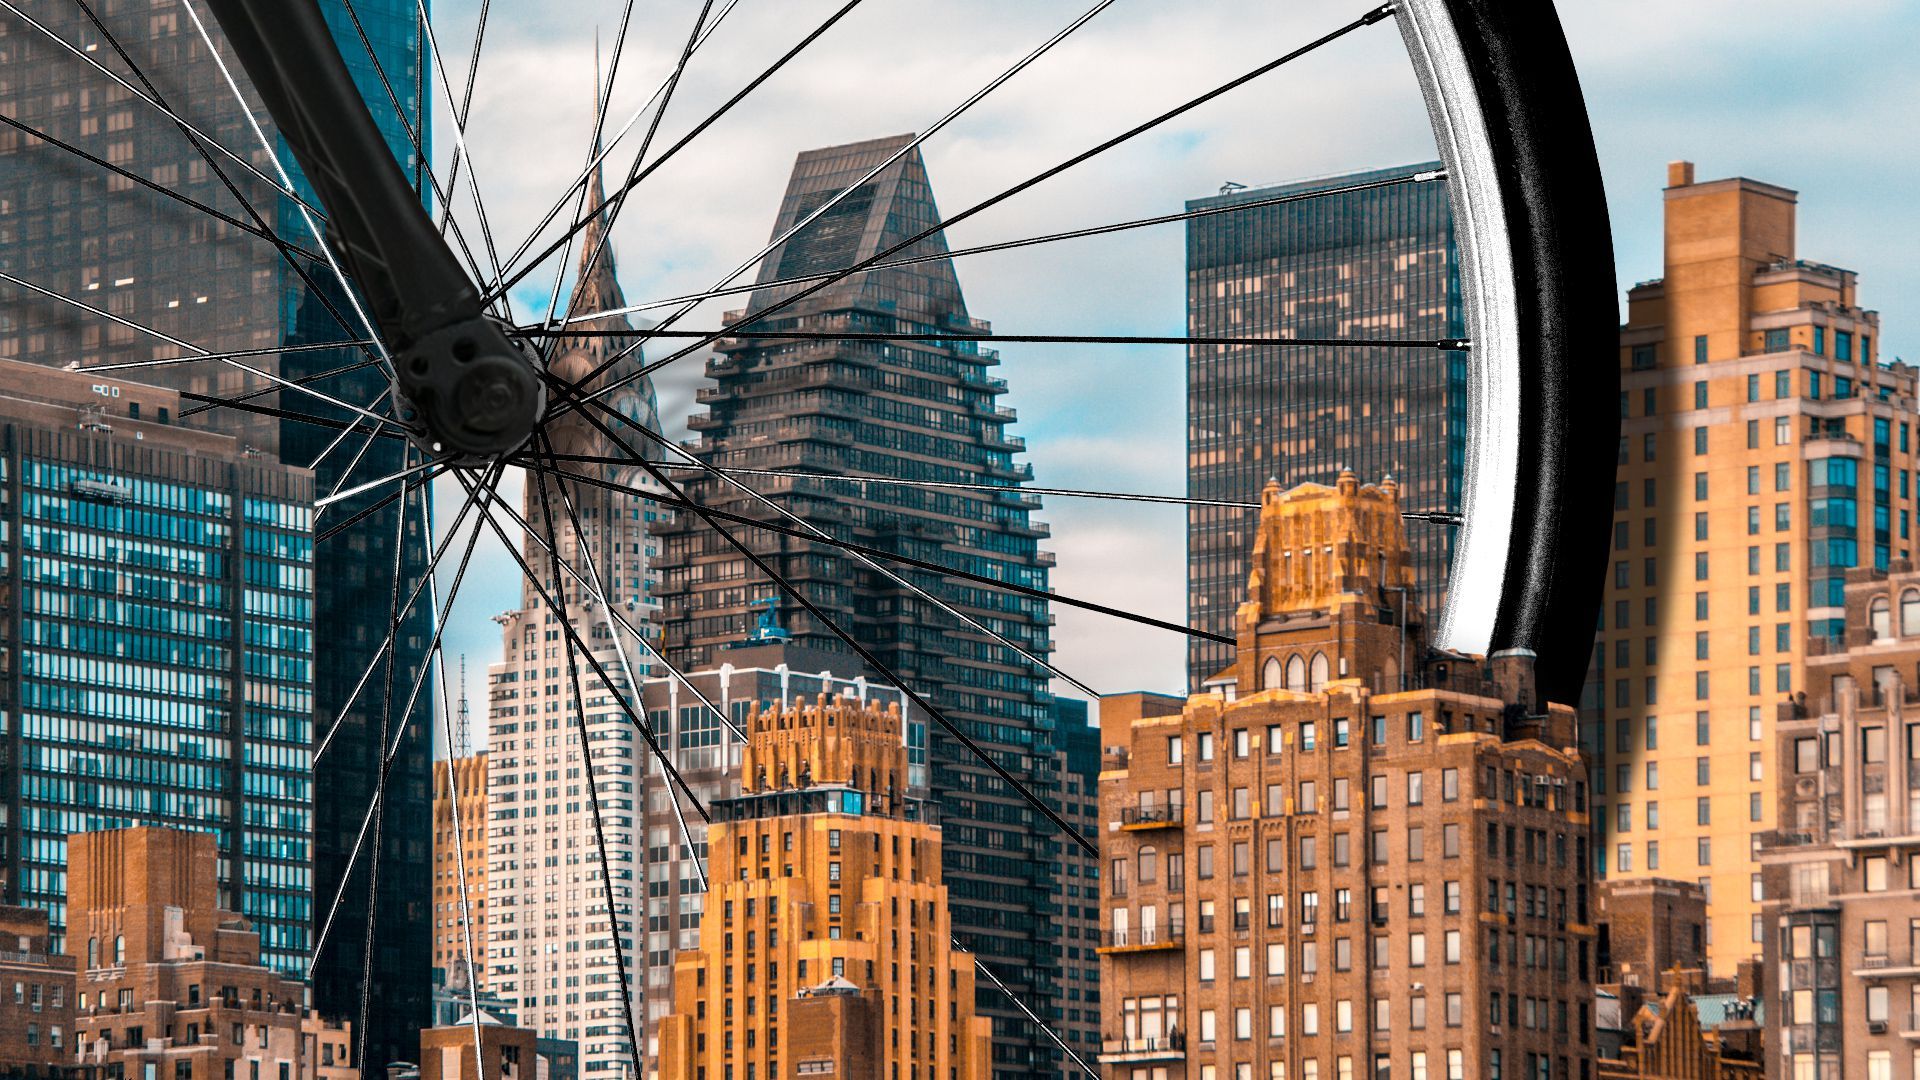 Illustration of a giant bicycle wheel in between small skyscrapers